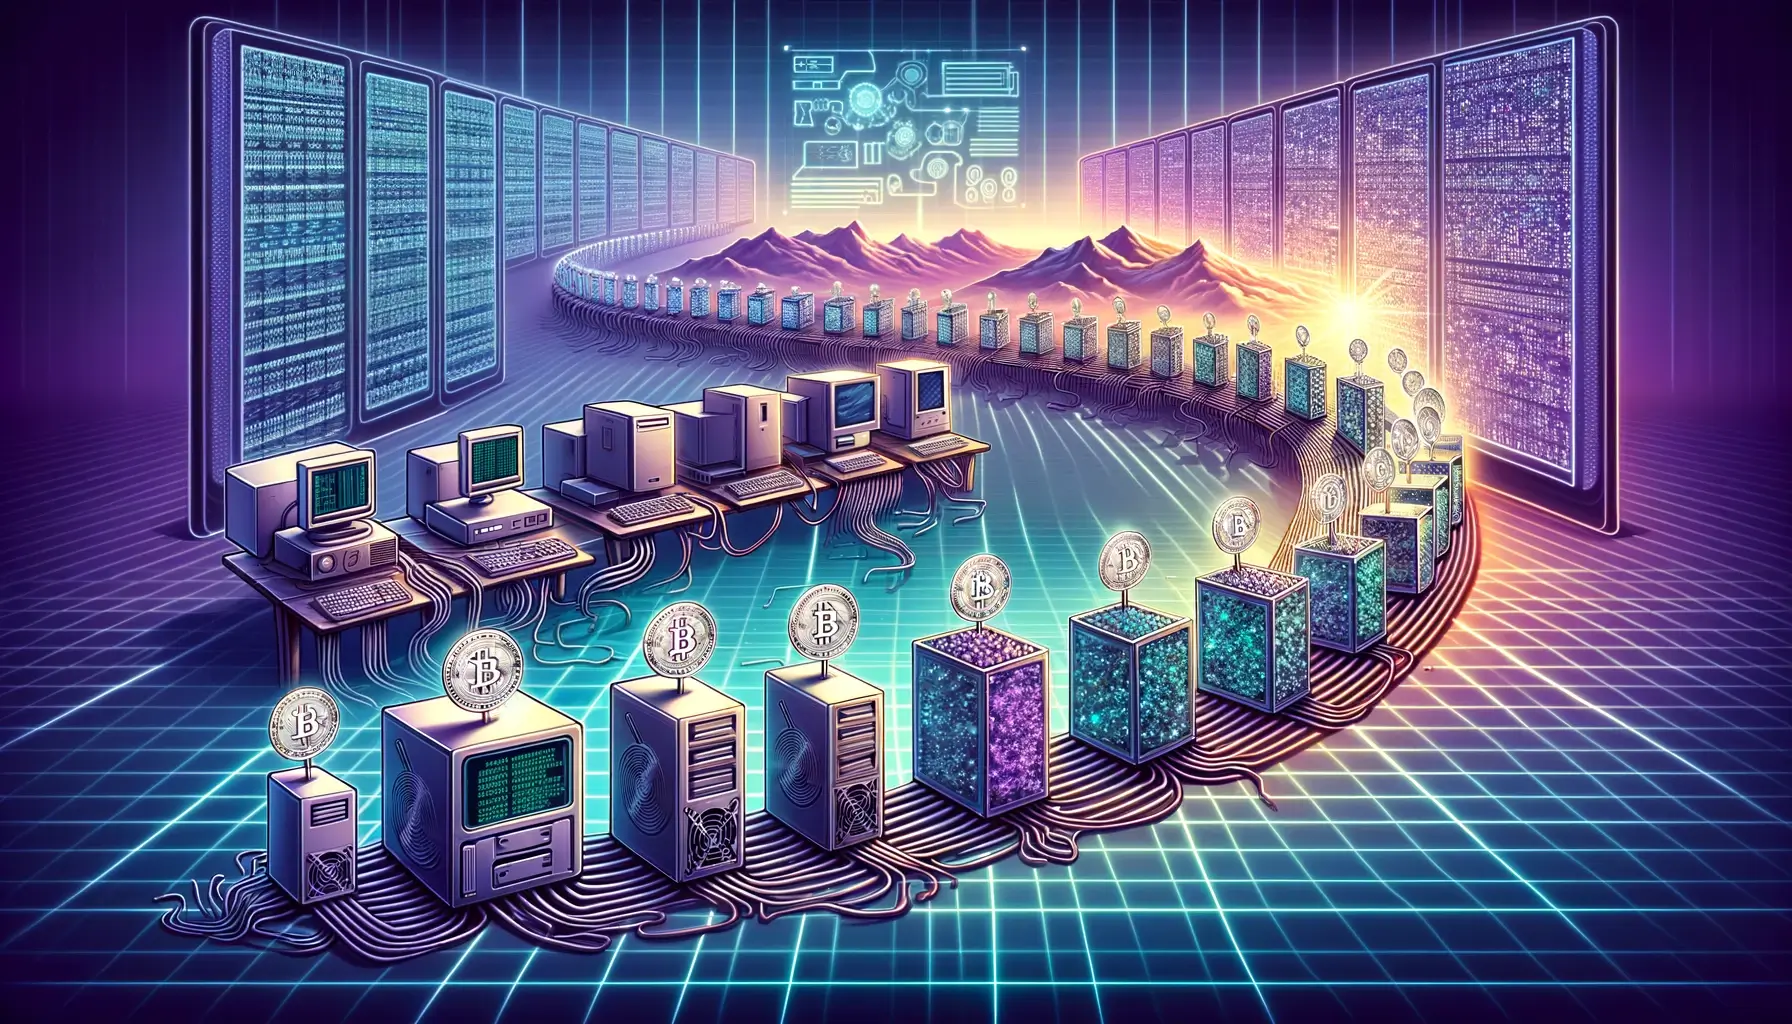 Timeline illustration of Proof of Work evolution in cryptocurrency, featuring 1990s computers to futuristic mining rigs, with a background transitioning from binary code to advanced digital interface.